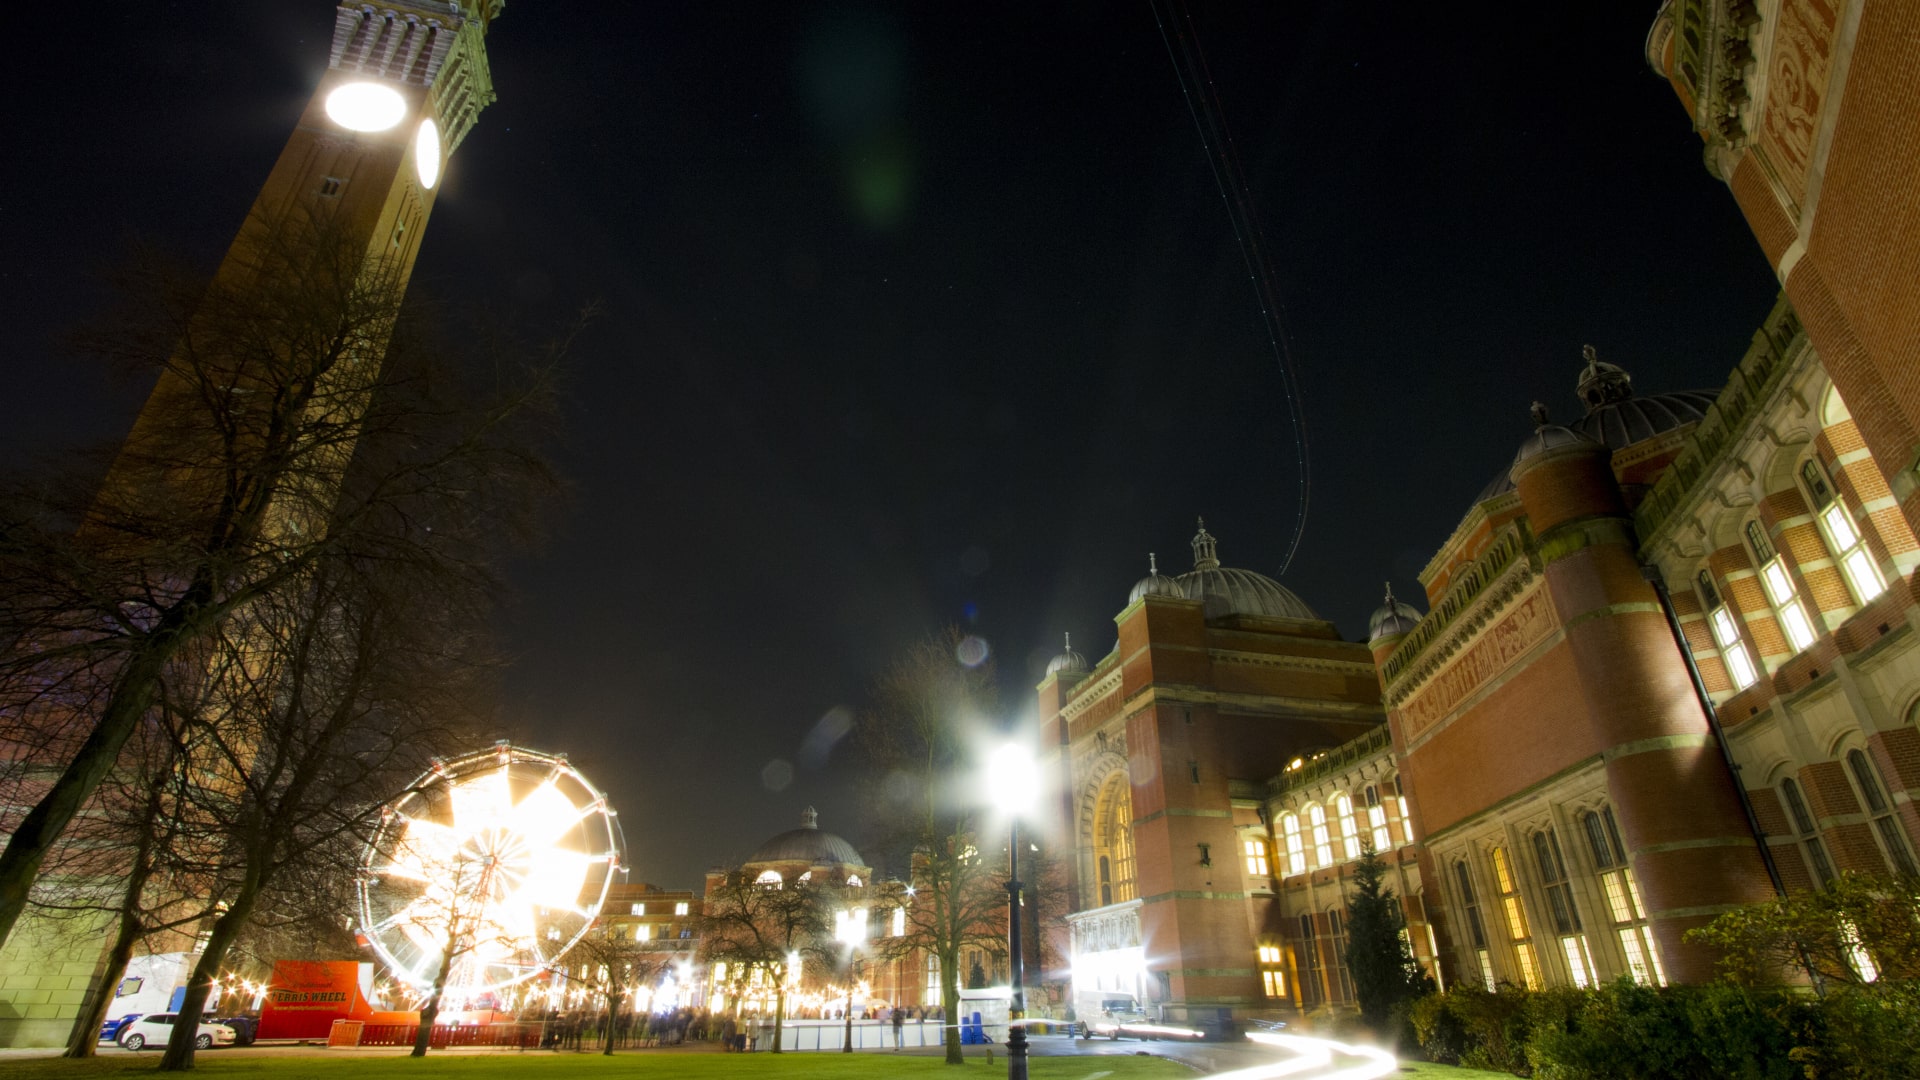 A long exposure of the Christmas fair in Chancellor's Court, with lights from the Ferris Wheel and other attractions lighting up the night.